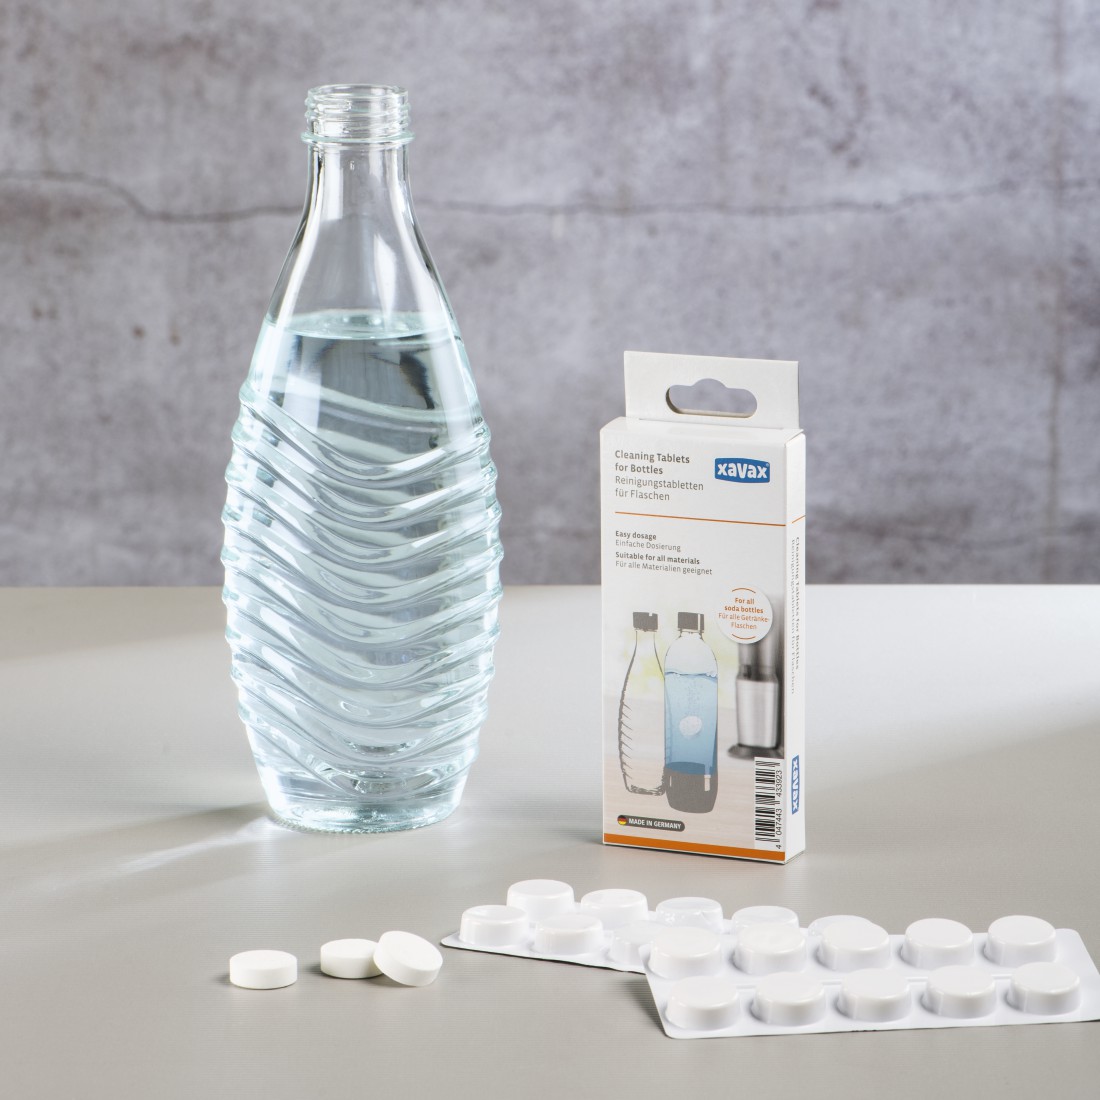 awx3 High-Res Appliance 3 - Xavax, Cleaning Tablets for Bottles, 30 Packs in Display